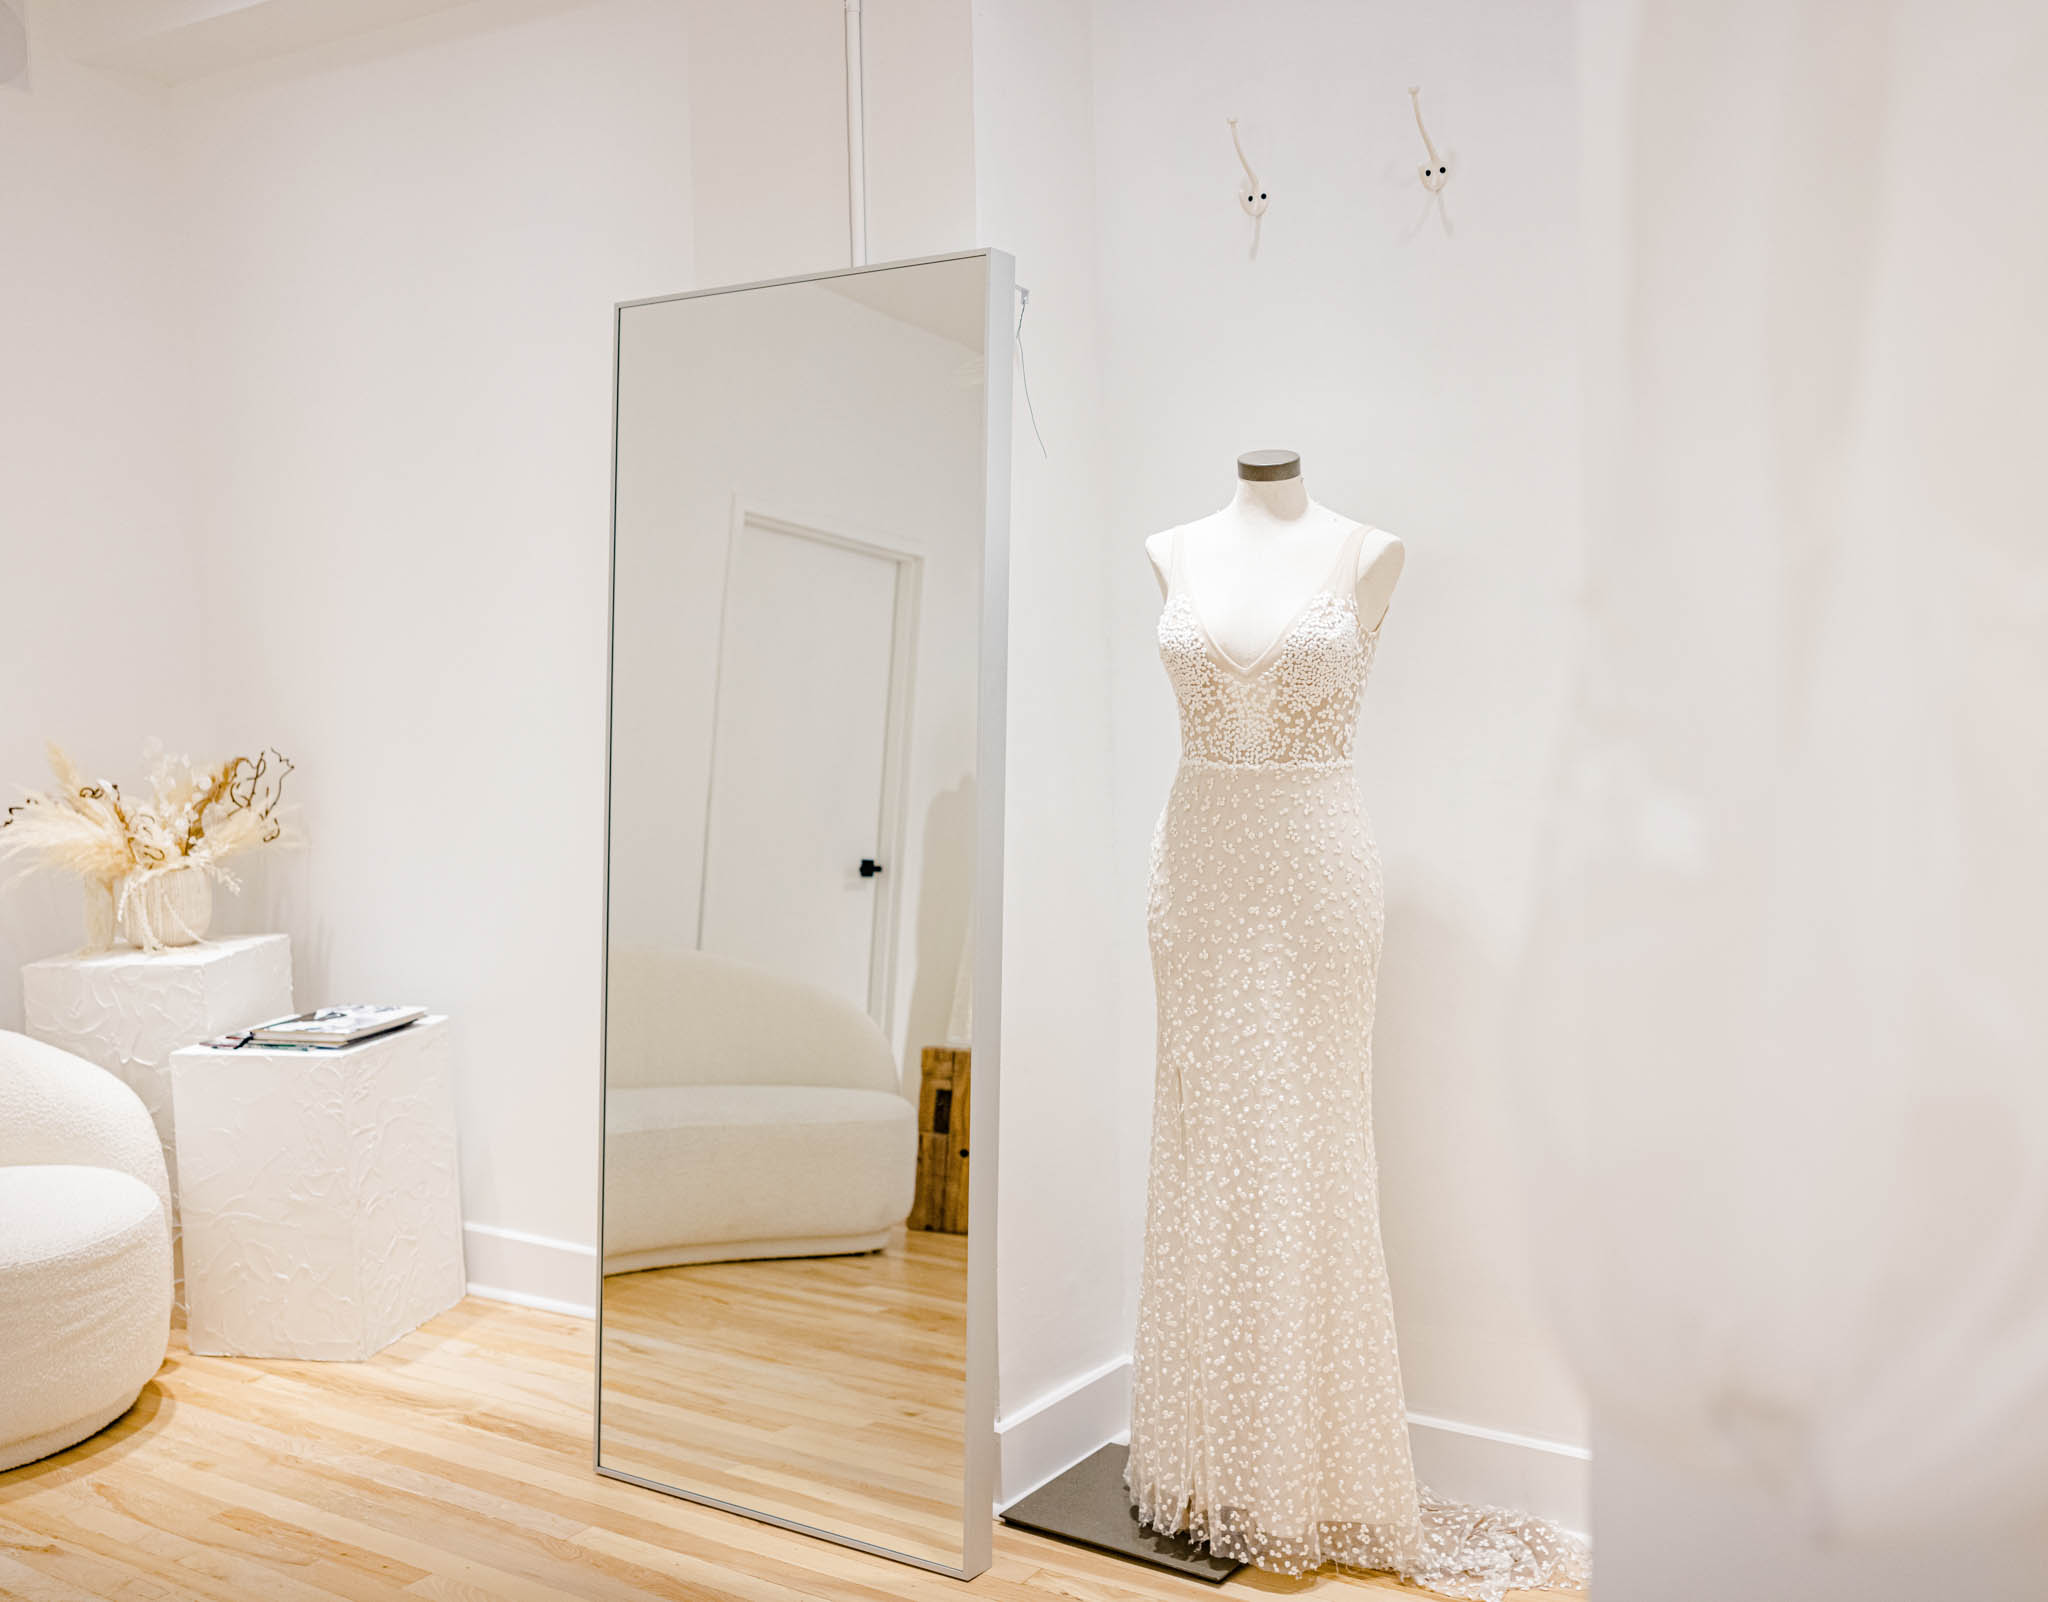 Shop Revelle Consultation Appointment Photo by Grey Loft Studio Modern Bride say yes for less